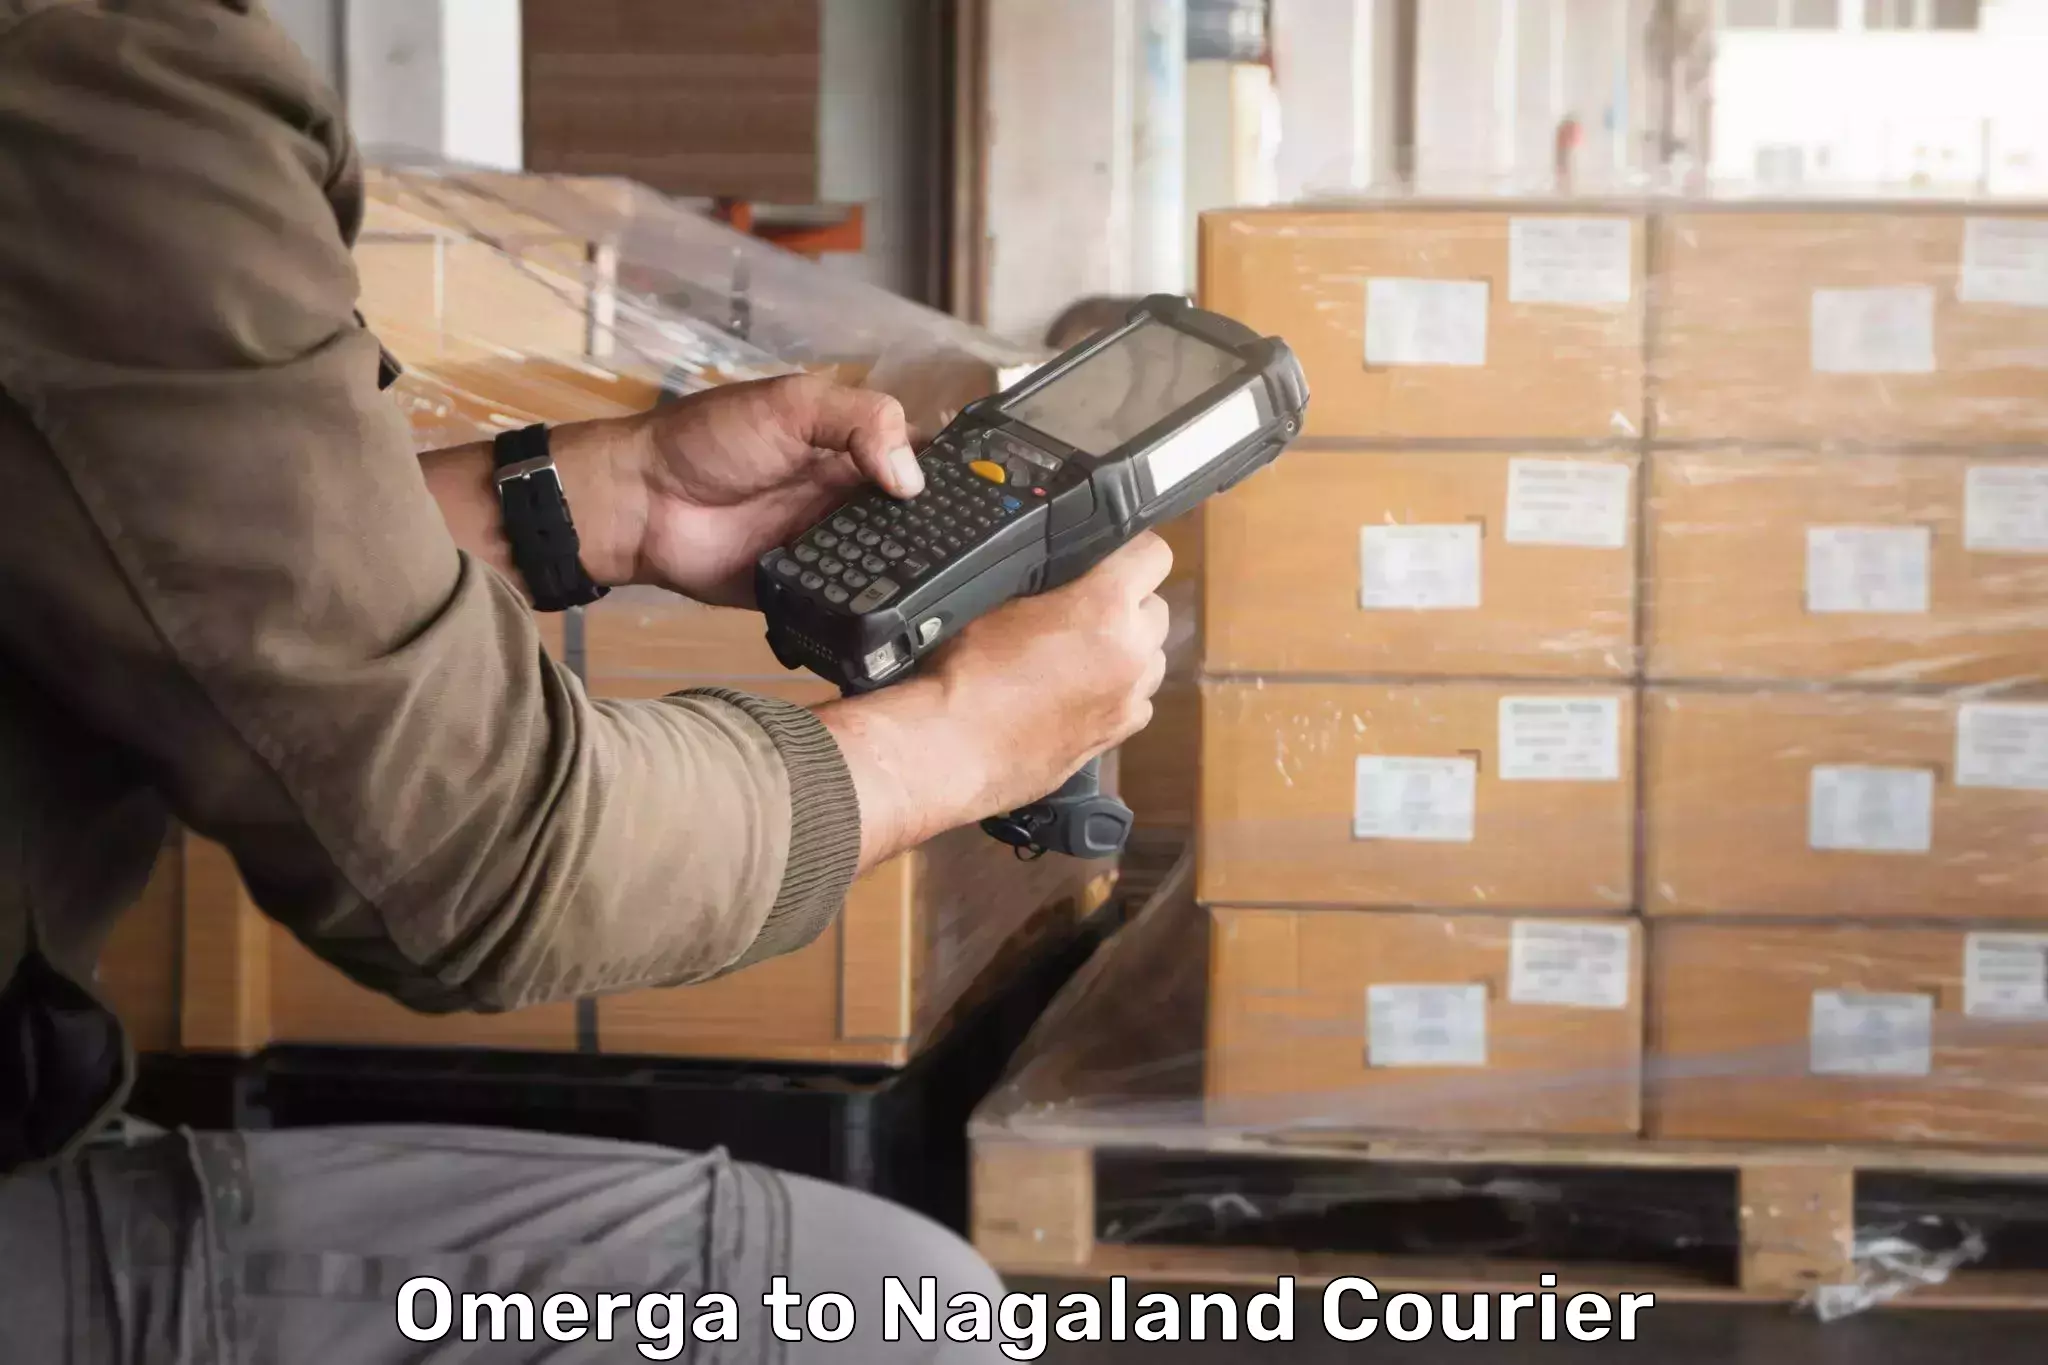 Automated parcel services Omerga to Mon